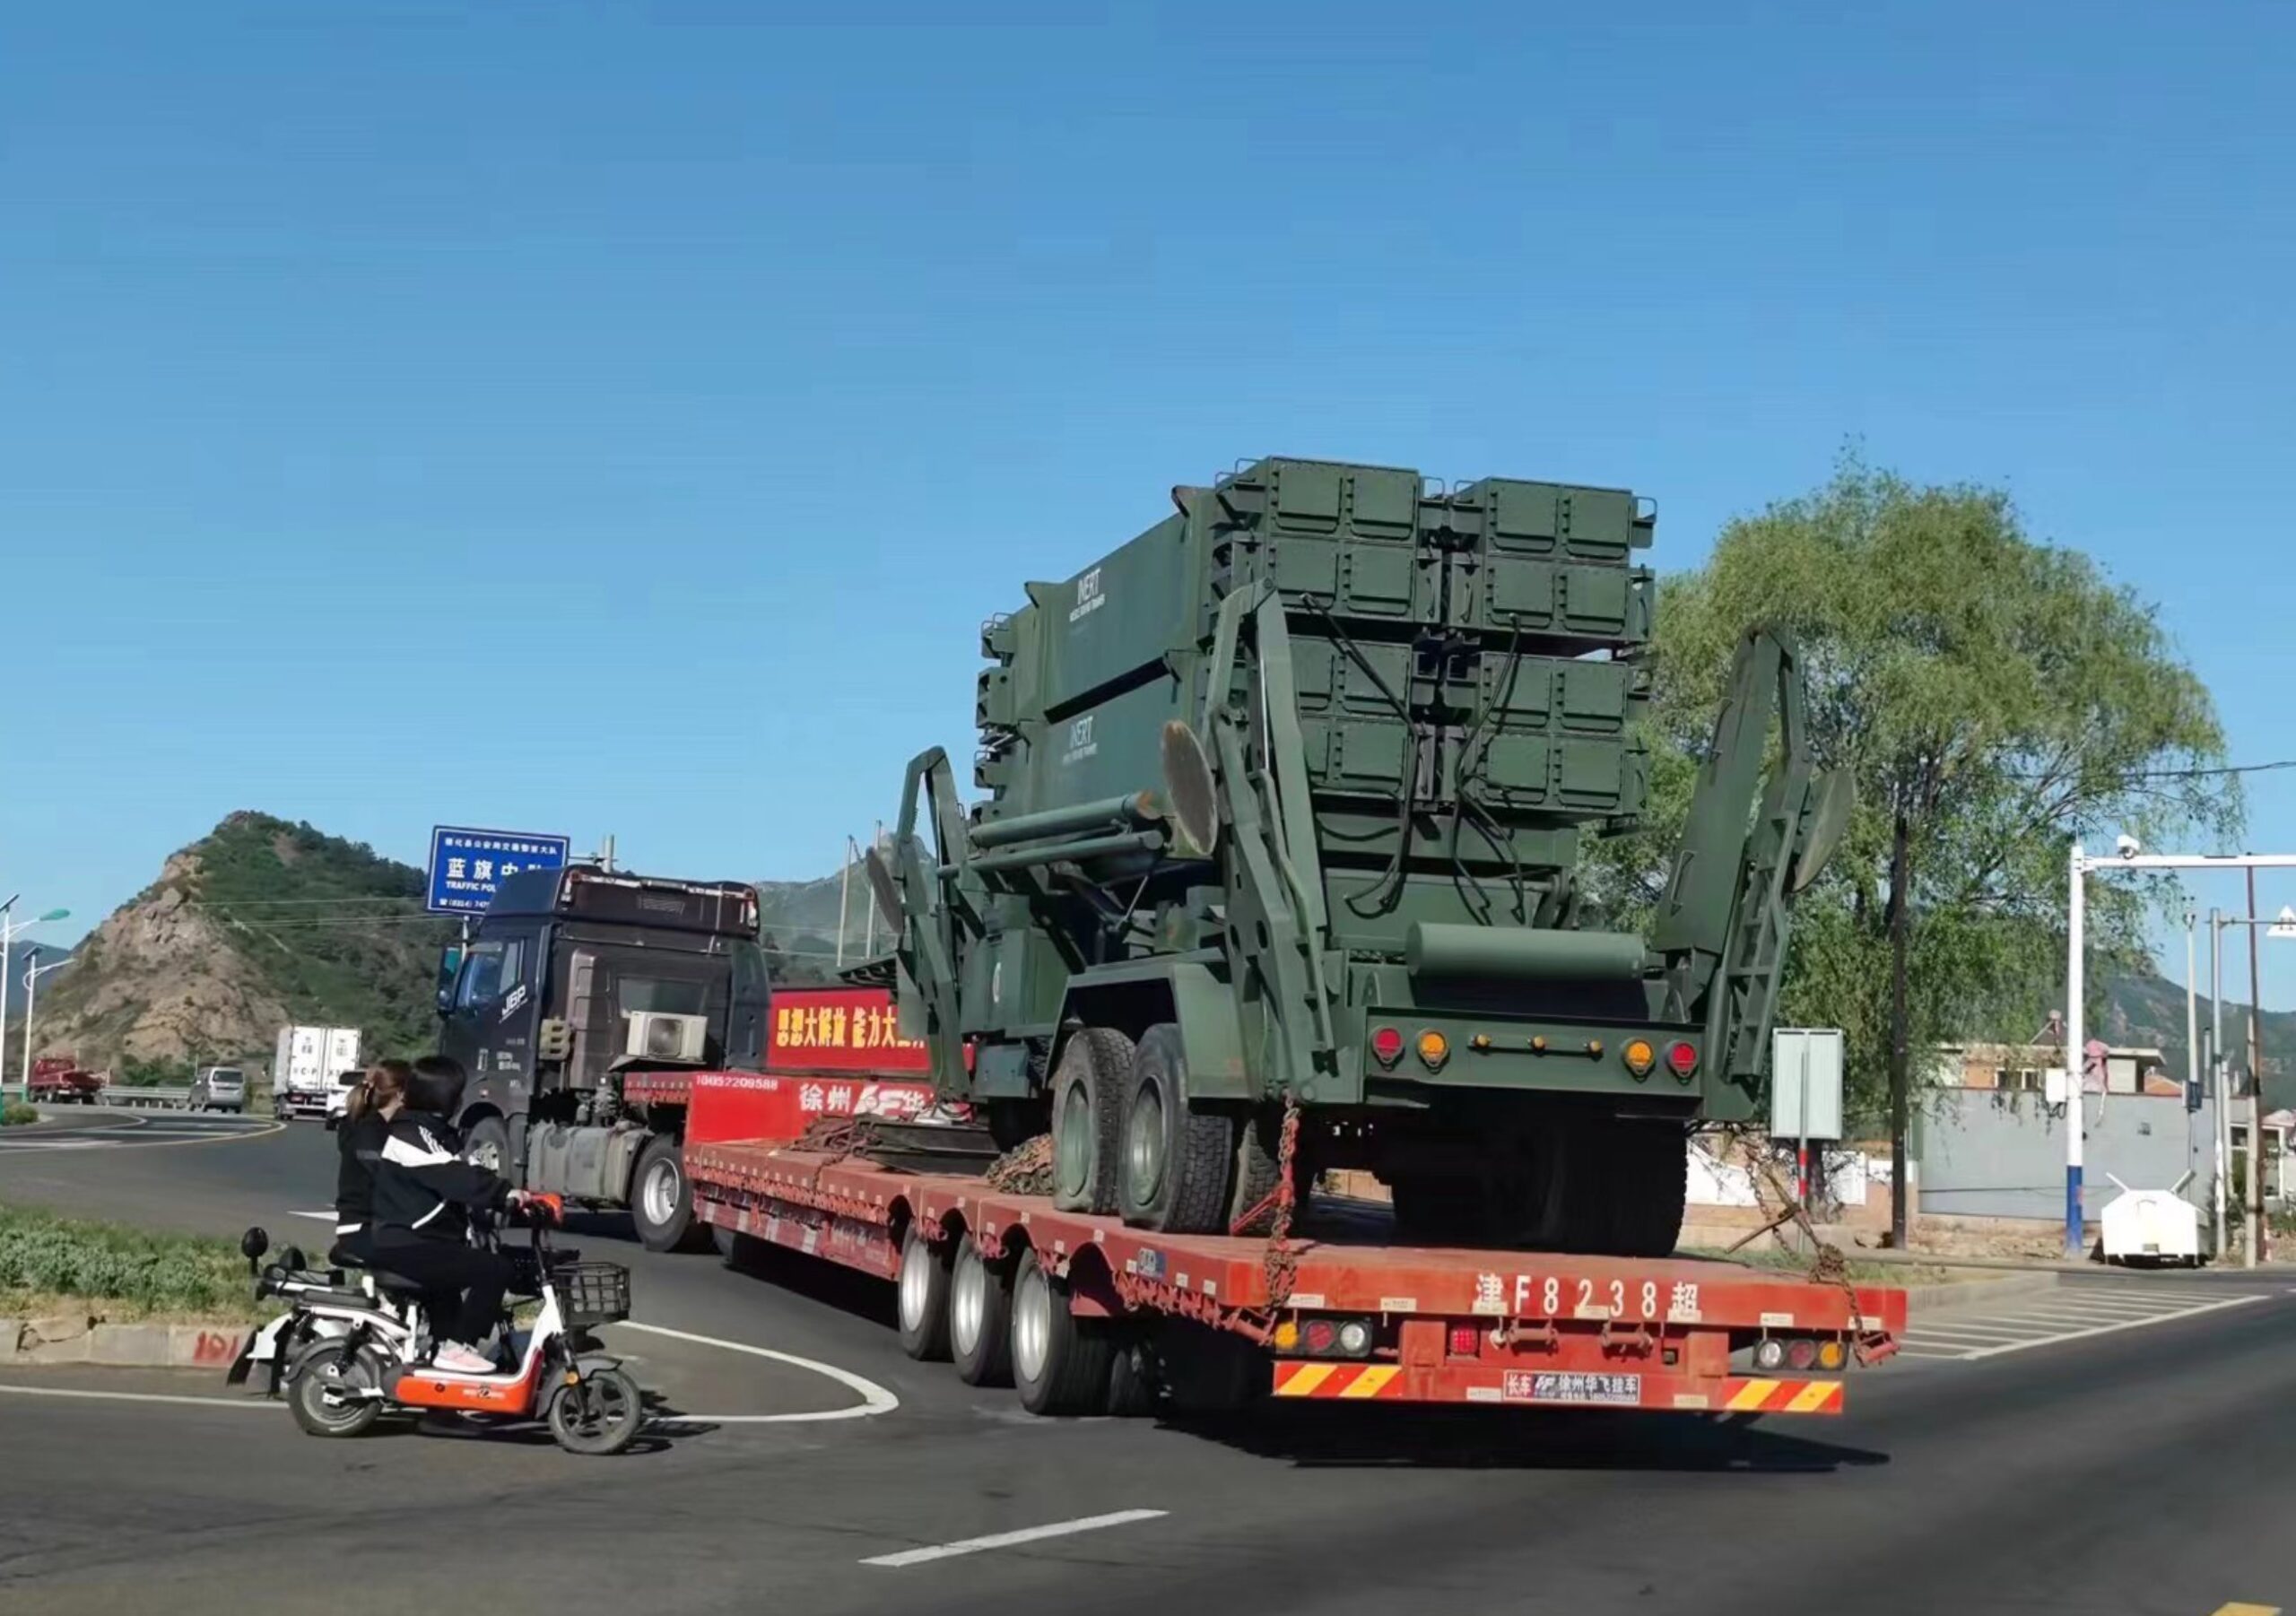 US Patriot Missile System Captured in UKR Given to China